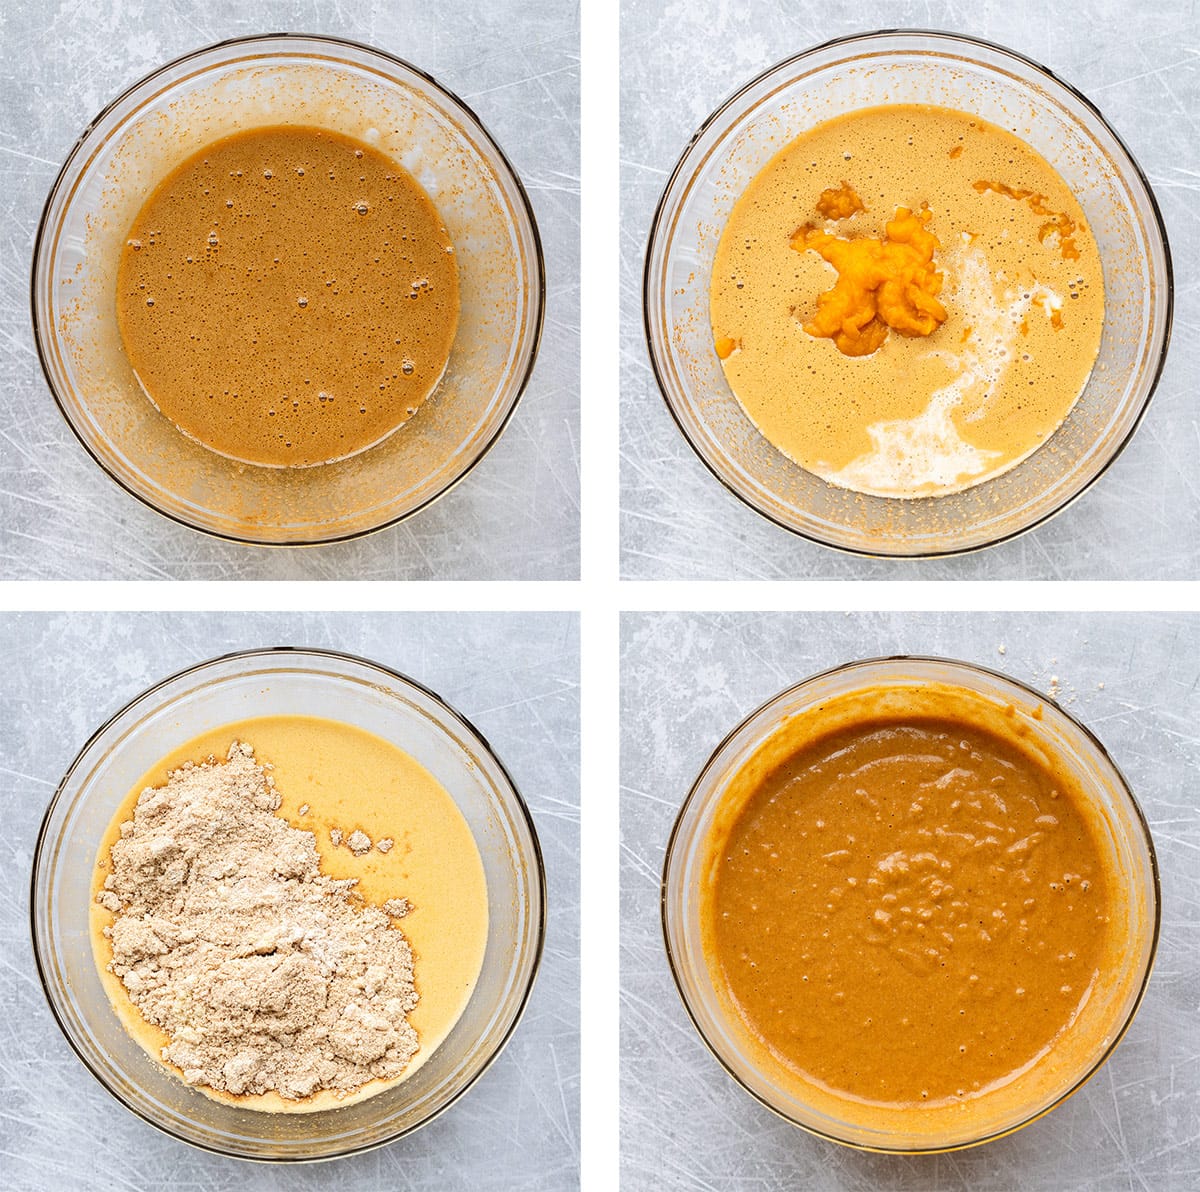 Four photos showing how to make pumpkin bread from mixing wet and dry ingredients separately and then together.